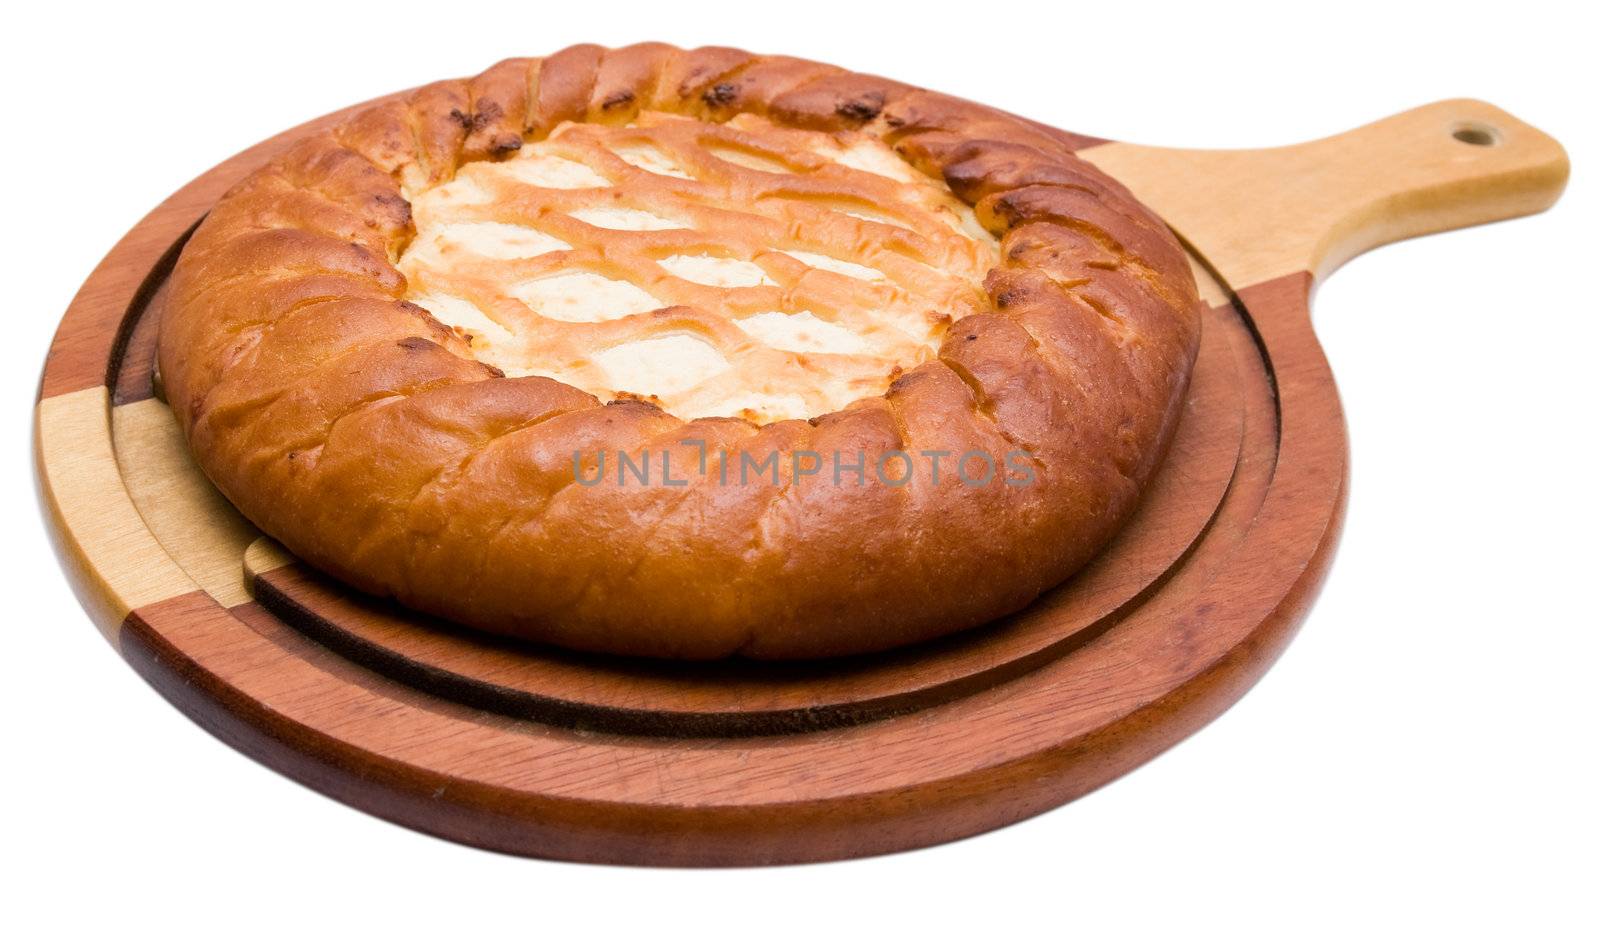 The celebratory pie lays on a board, isolated on a white background.